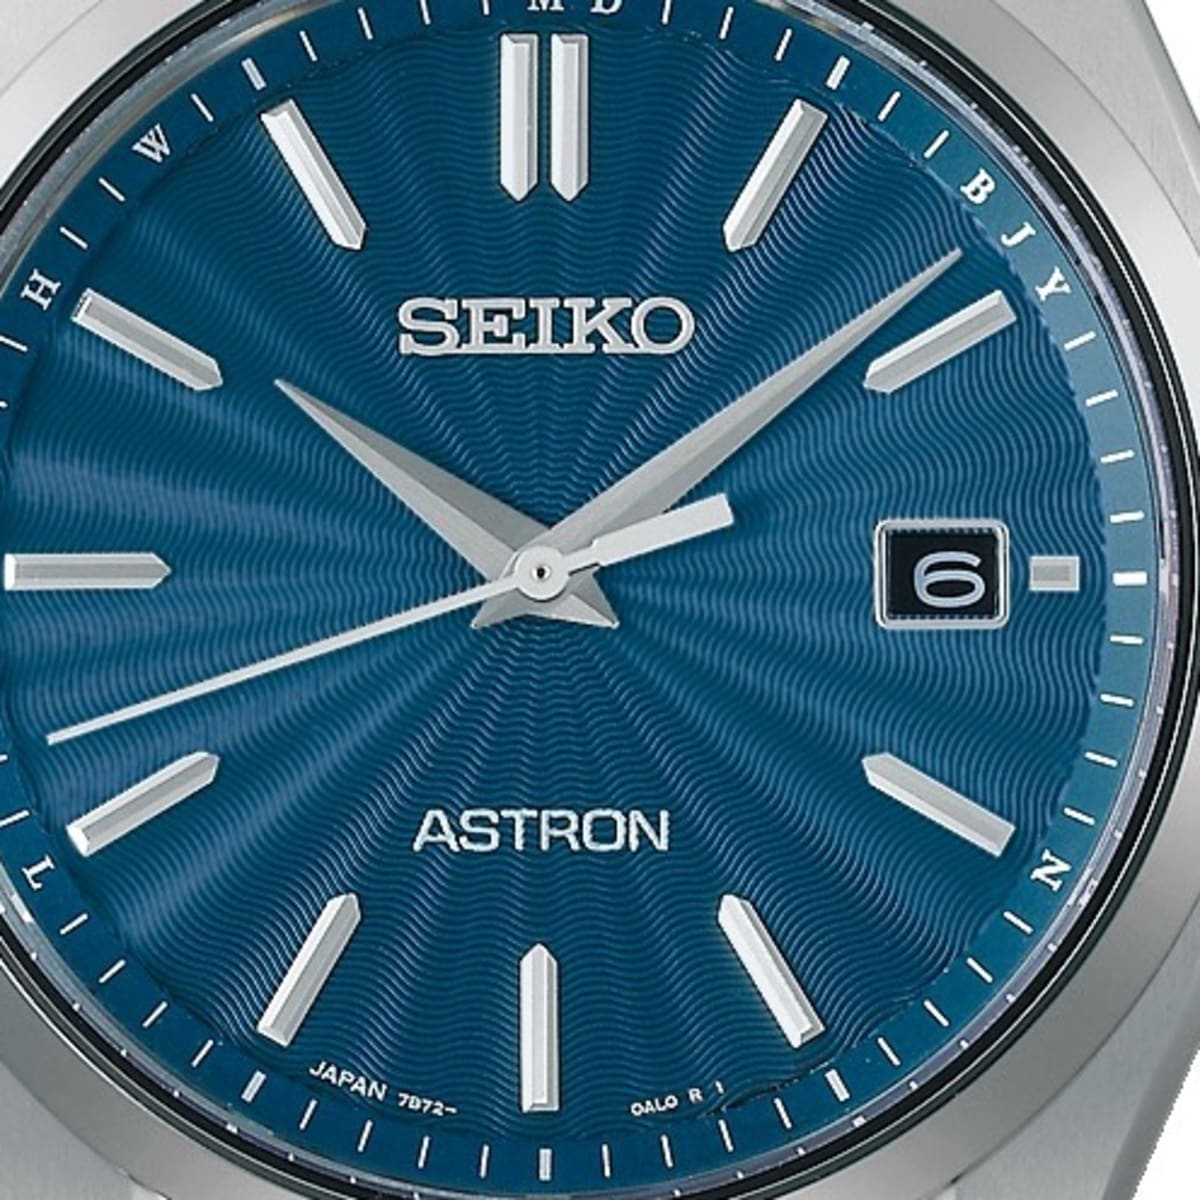 Seiko introduces a more minimal version of the Astron with a 39mm model in  lightweight titanium - Acquire